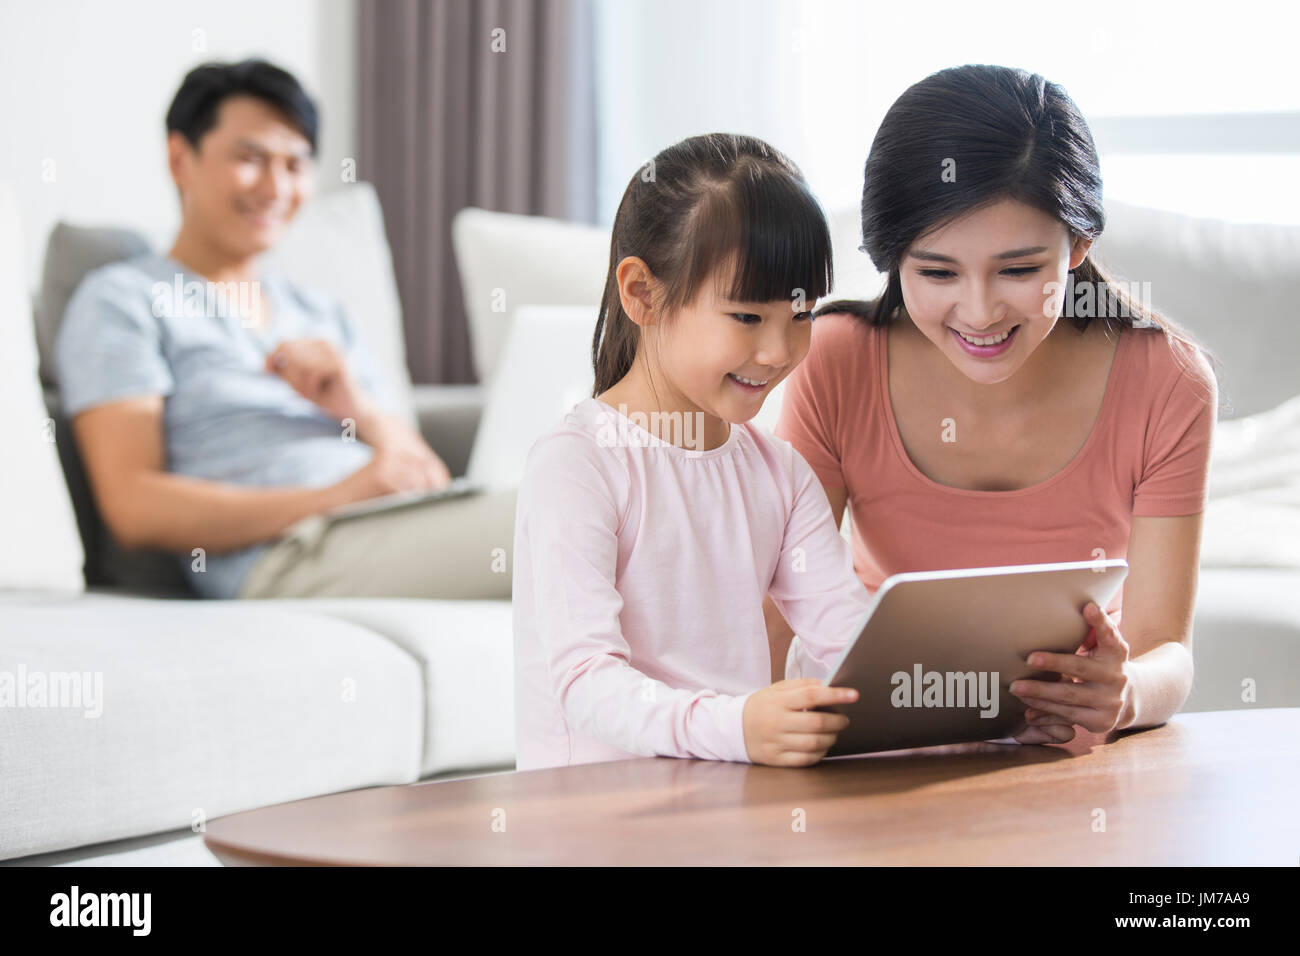 Happy young Chinese family using digital gadgets at home Stock